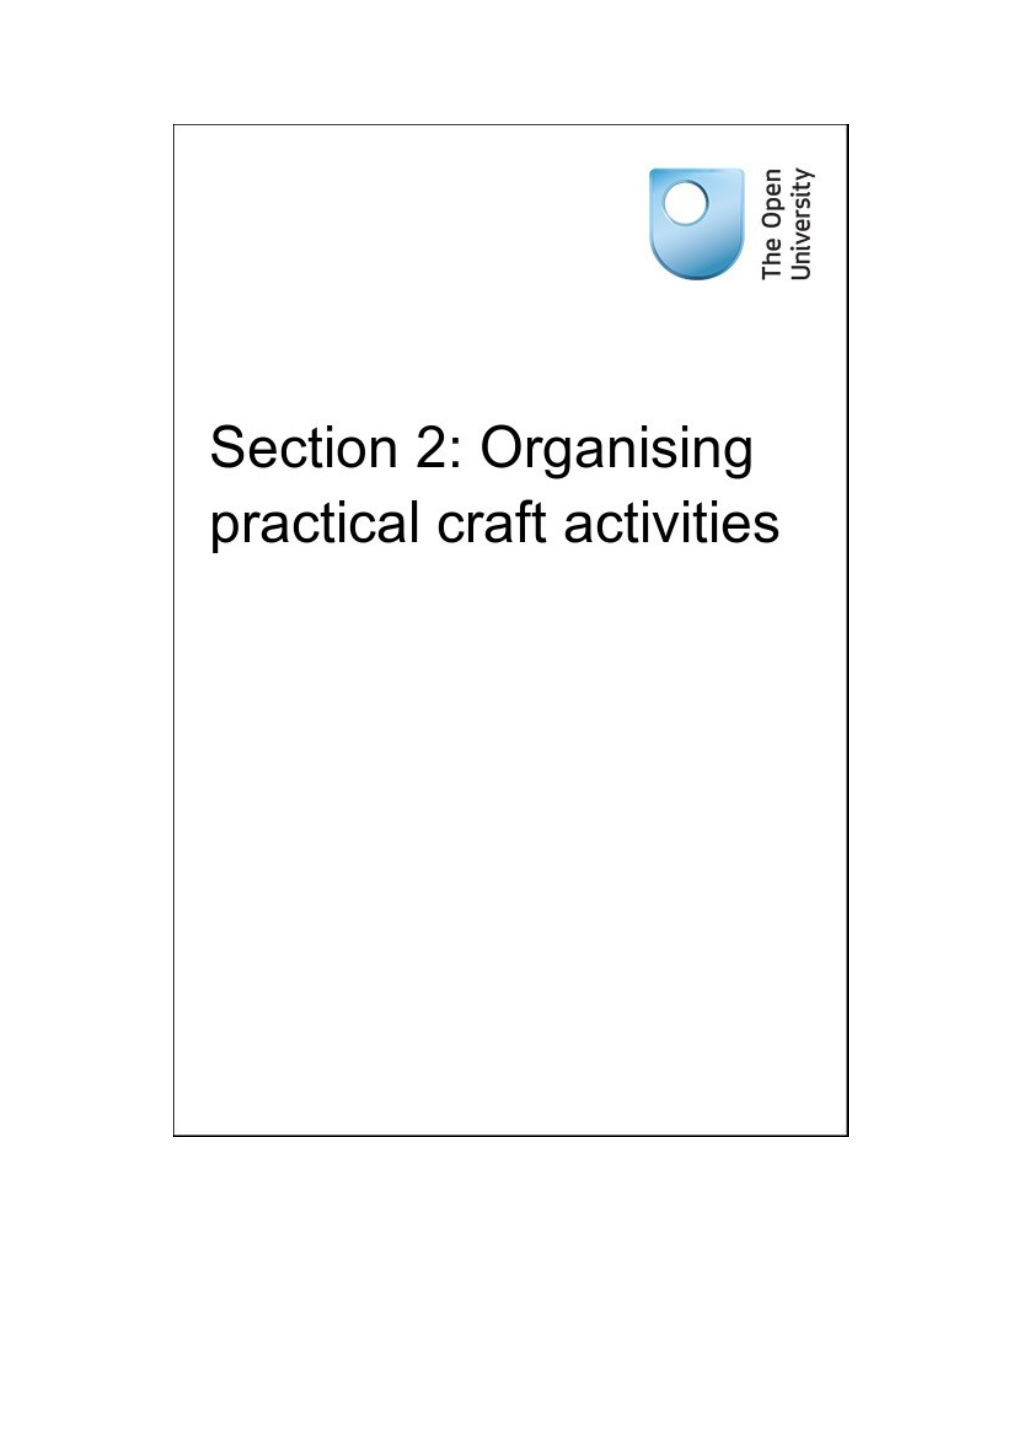 Section 2: Organising Practical Craft Activities